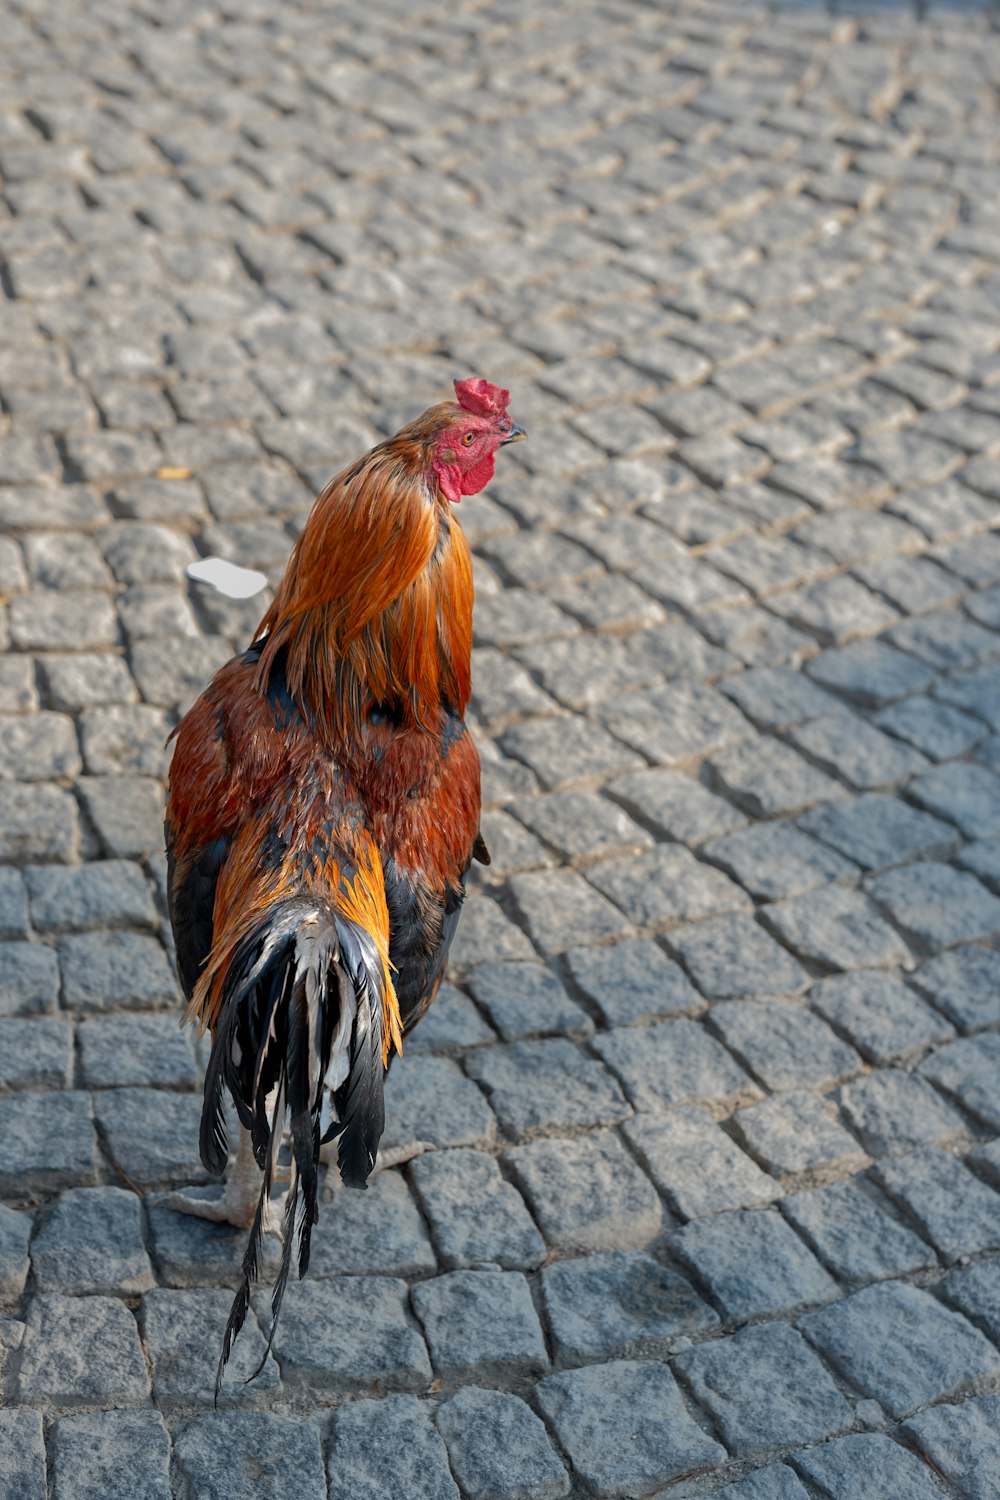 a close up of a rooster on a cobblestone road